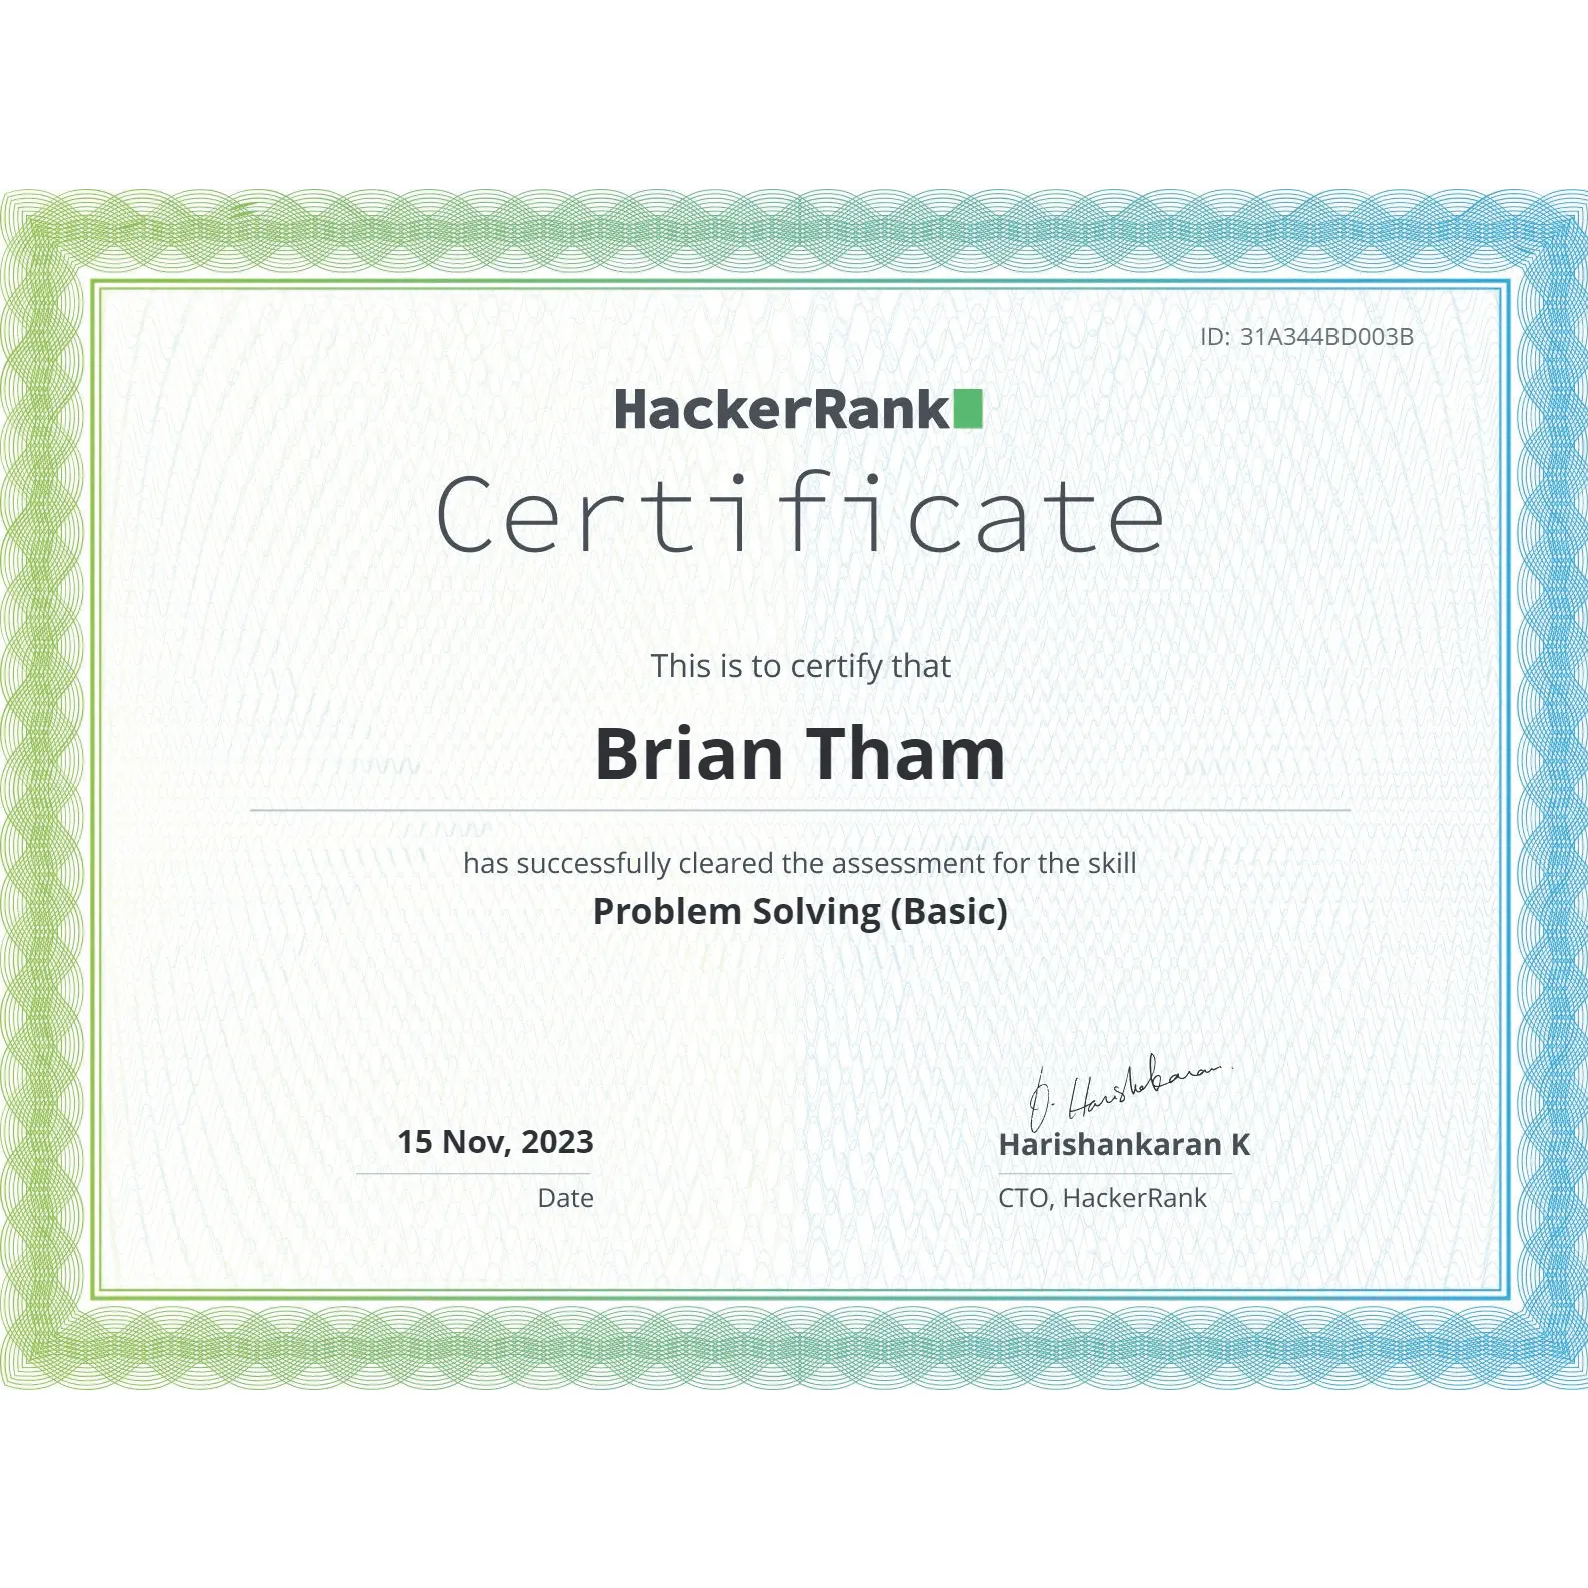 HackerRank Problem Solving Basic certificate awarded to Brian Tham